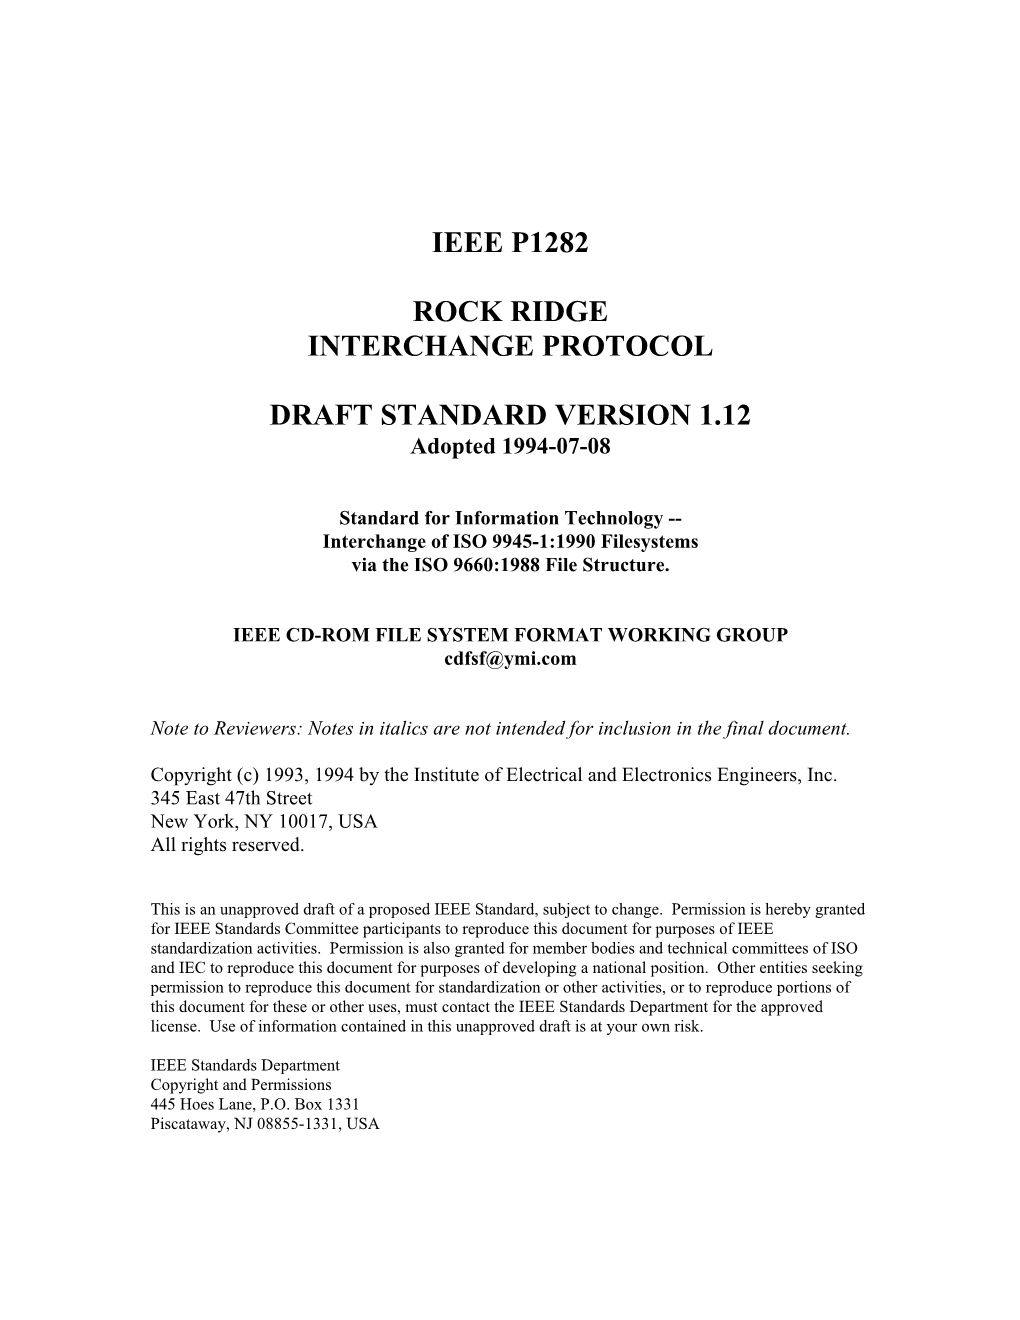 IEEE P1282 Rock Ridge Interchange Protocol Is Being Recorded Within an ISO 9660-Compliant Volume Using the IEEE P1281 System Use Sharing Protocol (SUSP)